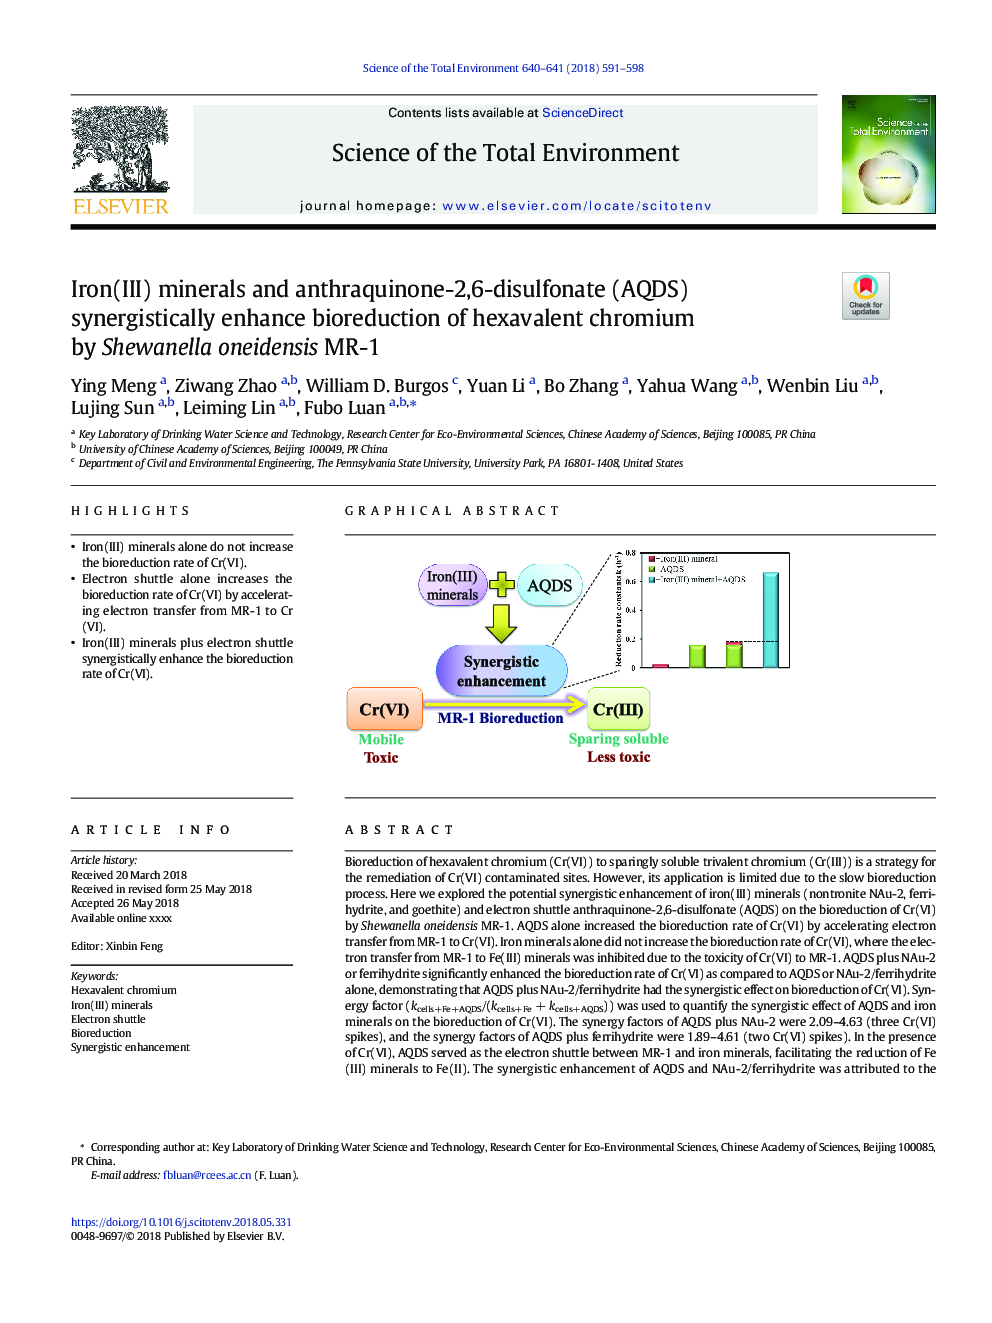 Iron(III) minerals and anthraquinone-2,6-disulfonate (AQDS) synergistically enhance bioreduction of hexavalent chromium by Shewanella oneidensis MR-1